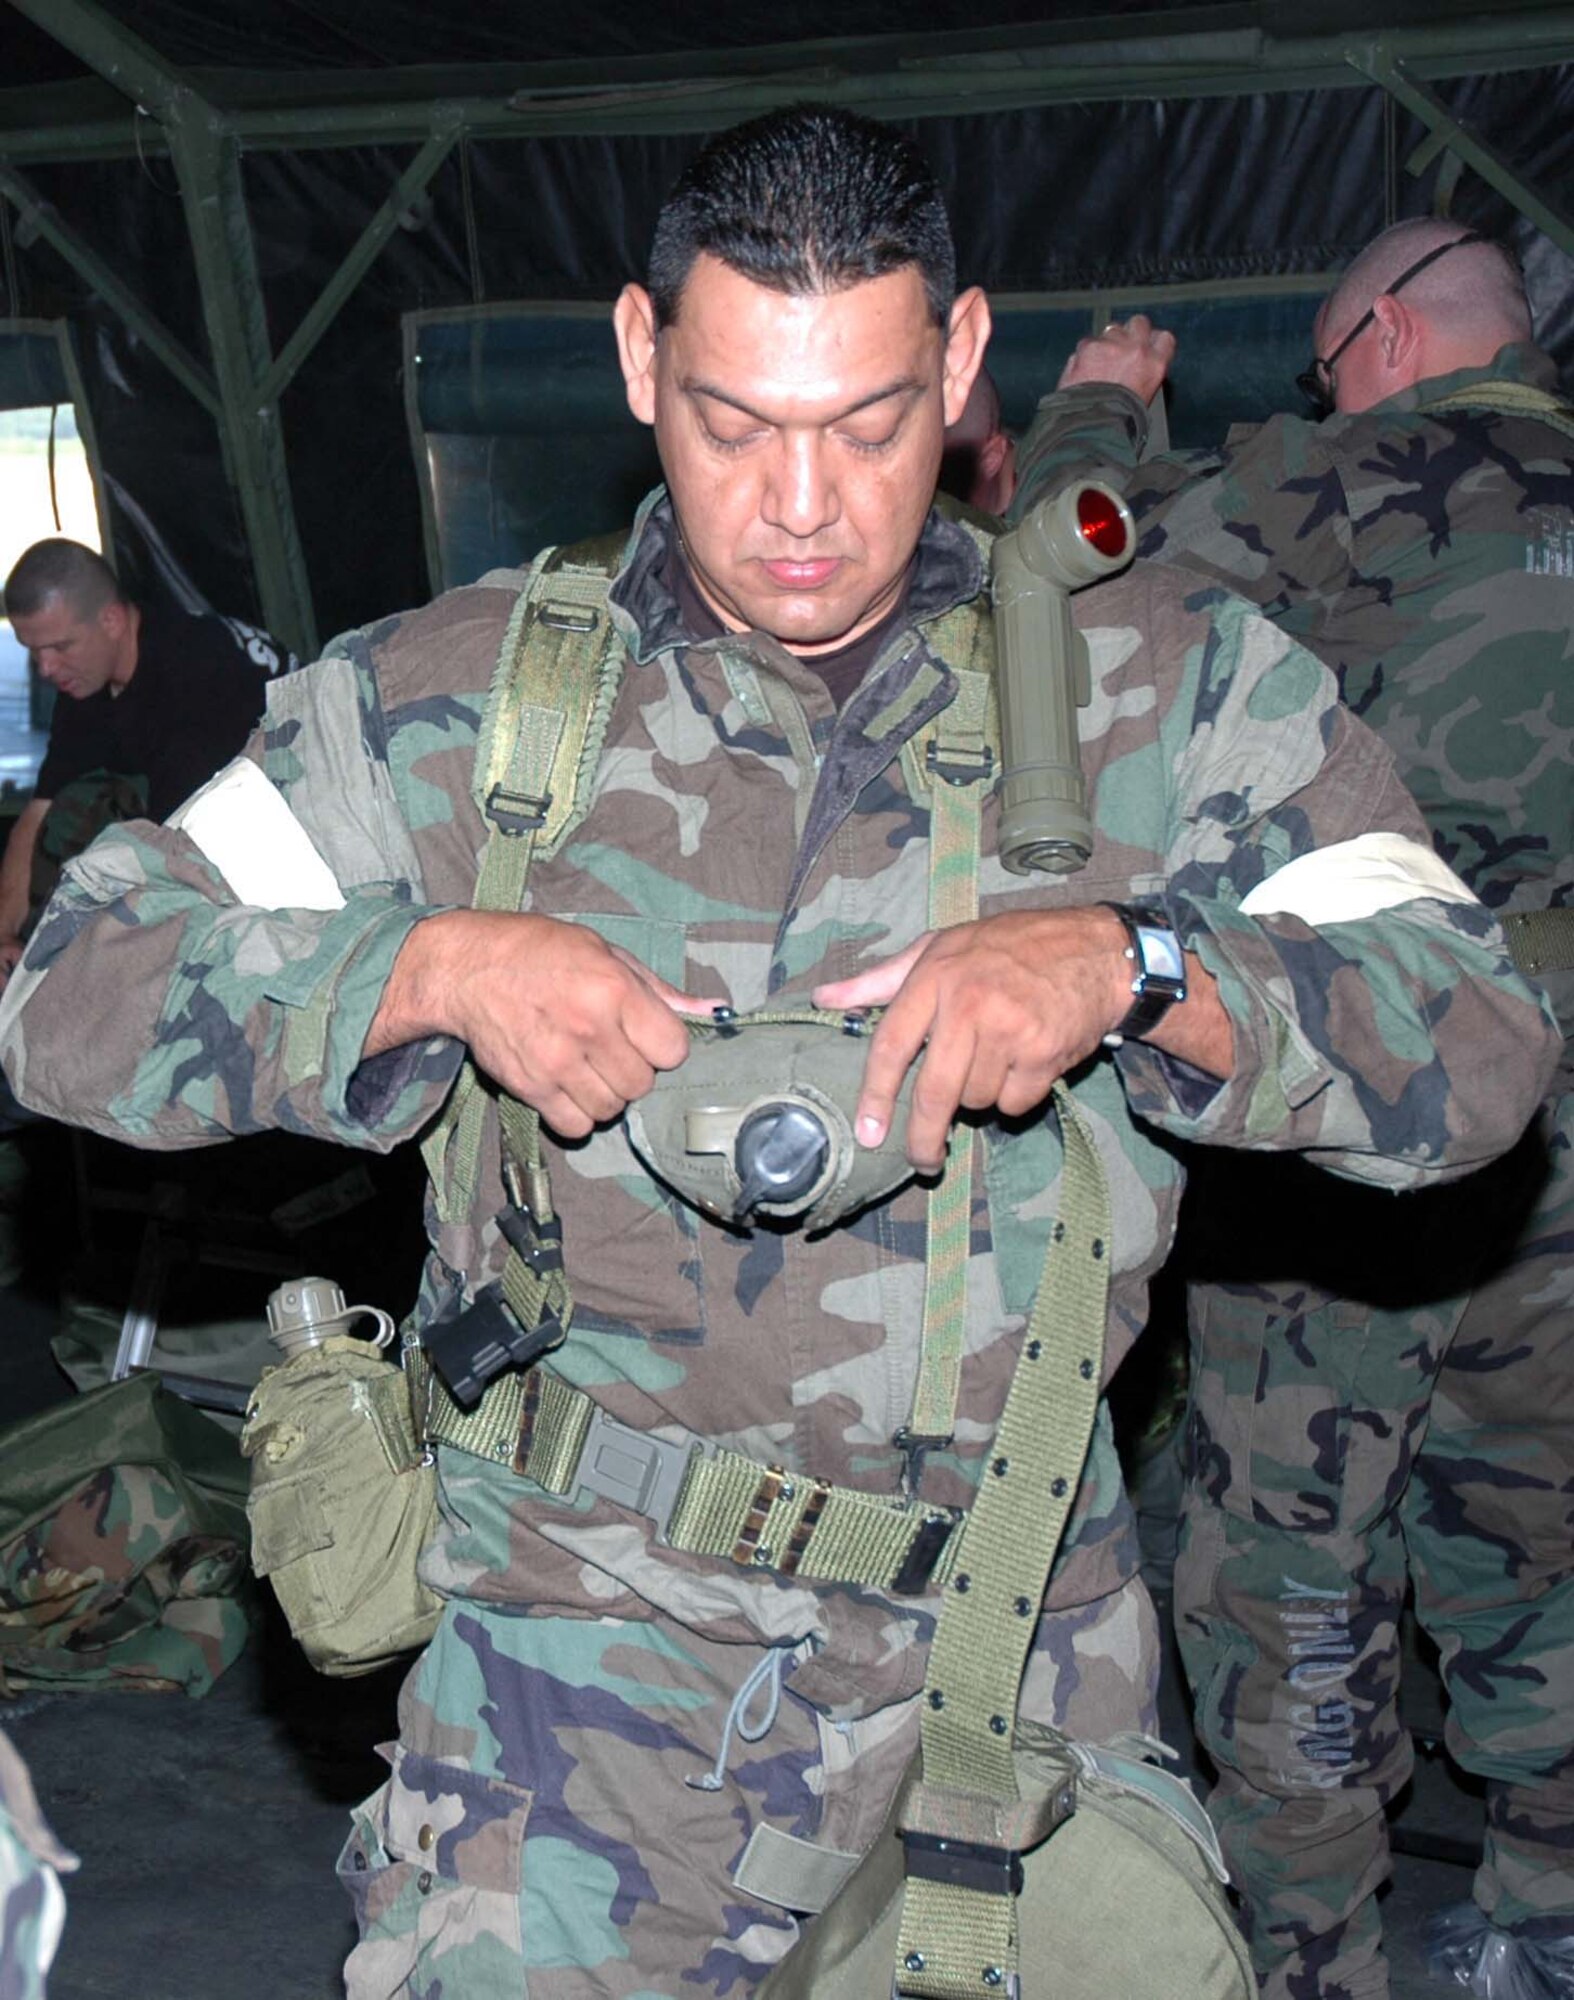 MCGUIRE AIR FORCE BASE,N.J. -- Tech. Sgt. Javier Diaz preps his web belt and canteen during a recent Battle Axe training session. Battle Axe is a half-day course designed to reinforce ability to survive and operate skills in a war environment.  Preparation for the upcoming Operational Readiness Inspection includes sending ORI participants through the Battle Axe training facility.  (U.S. Air Force photo/Master Sgt. Charles W. Kramer) 